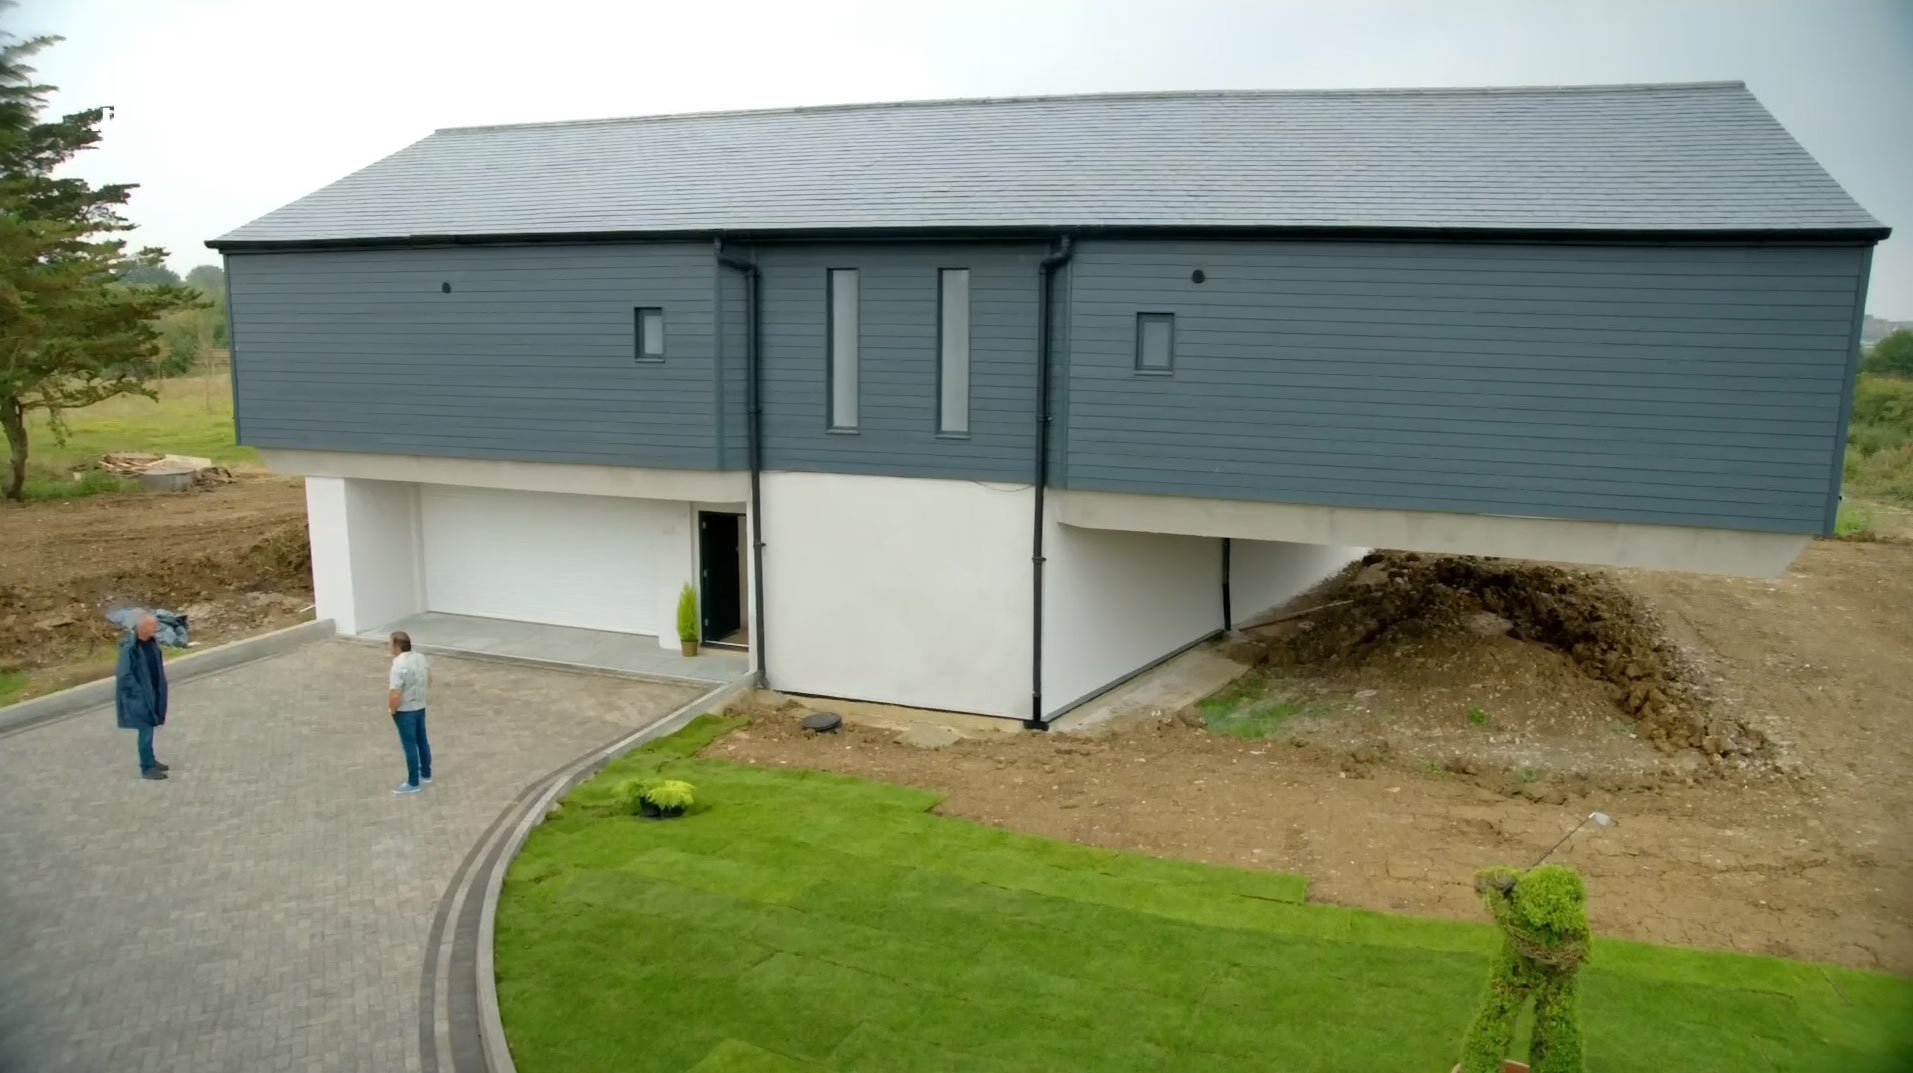 A view of the back of the Grand Designs house that AJN Steelstock supplied steel for